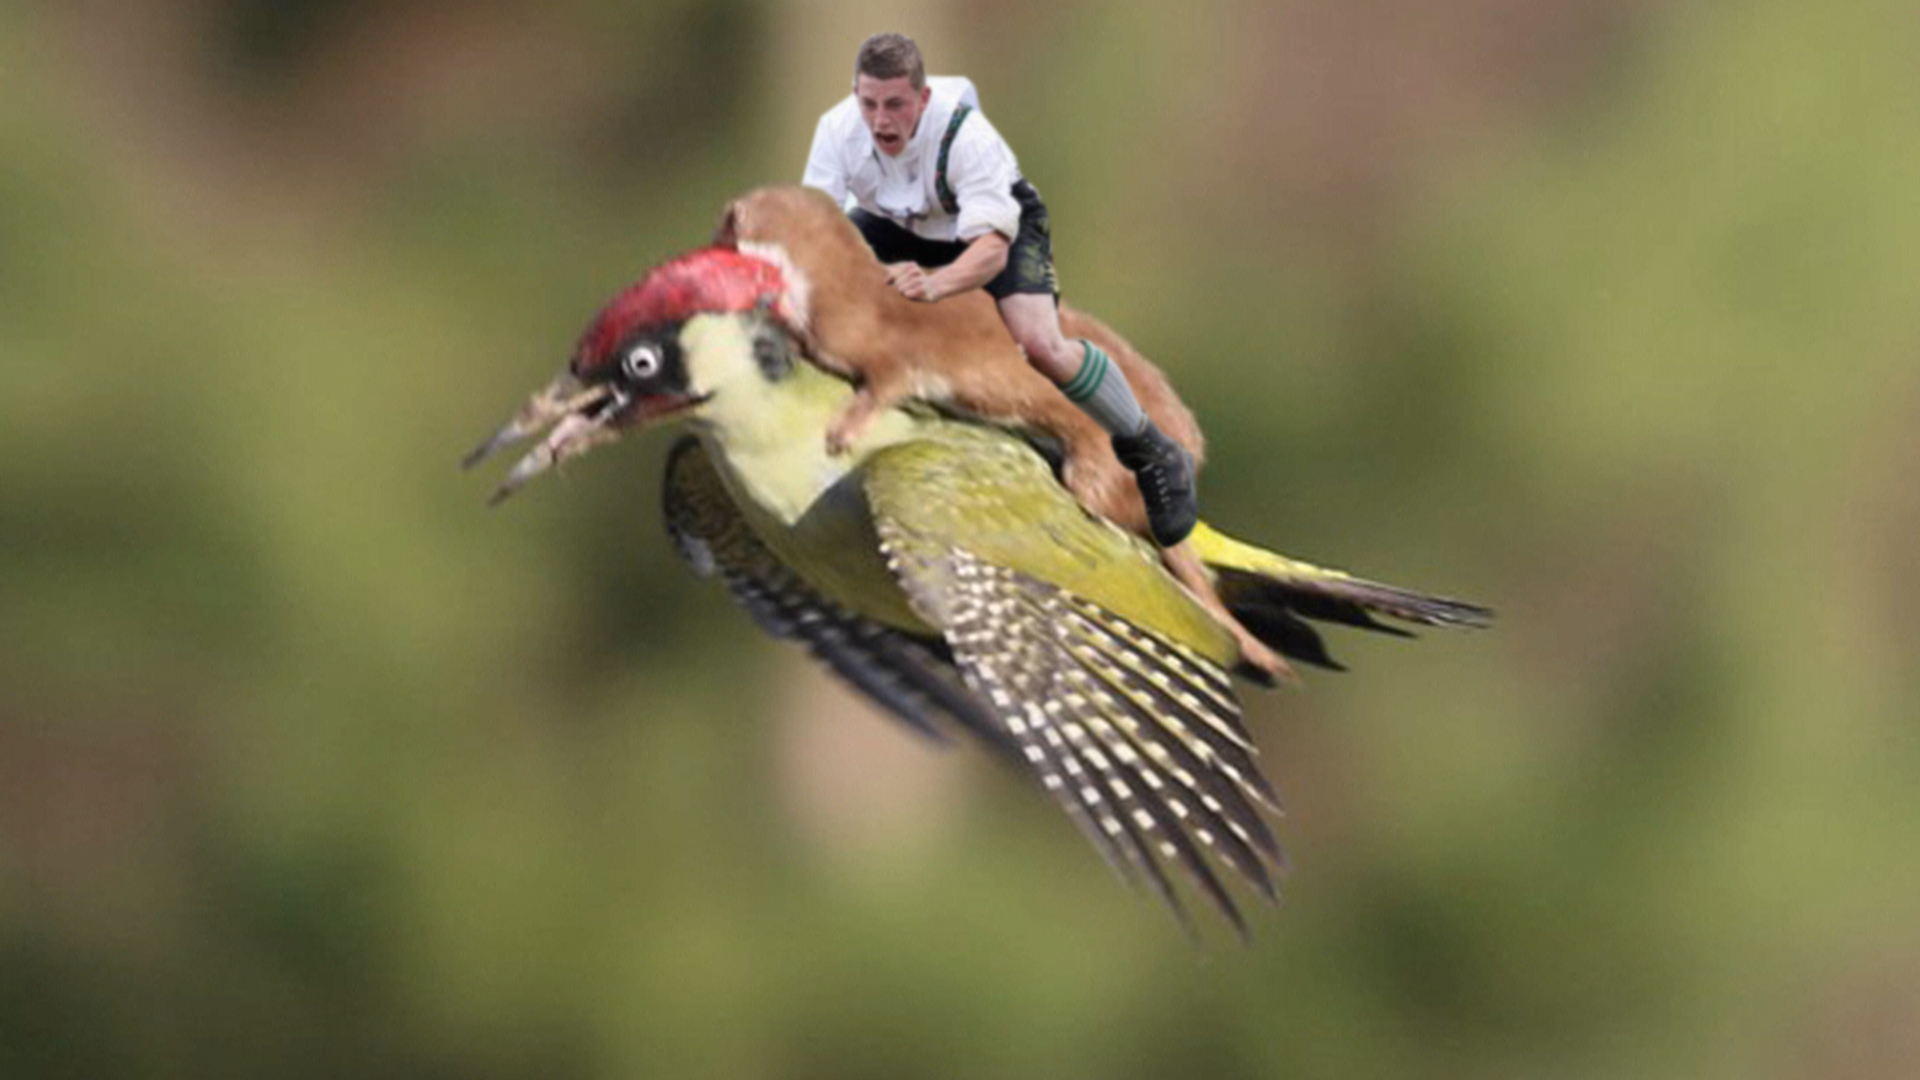 Just some guy hitchin' a ride on a weasel, that's hitchin' a ride on a bird...